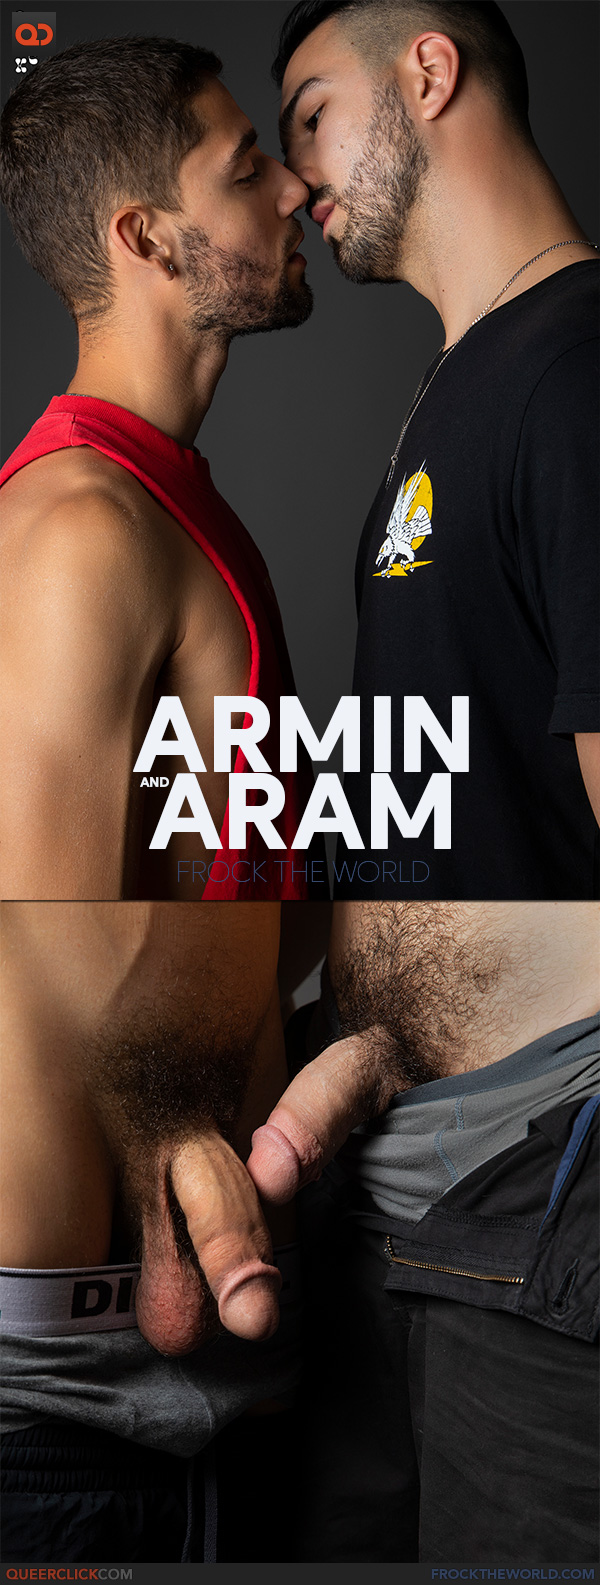 Frock The World: Aram and Amin